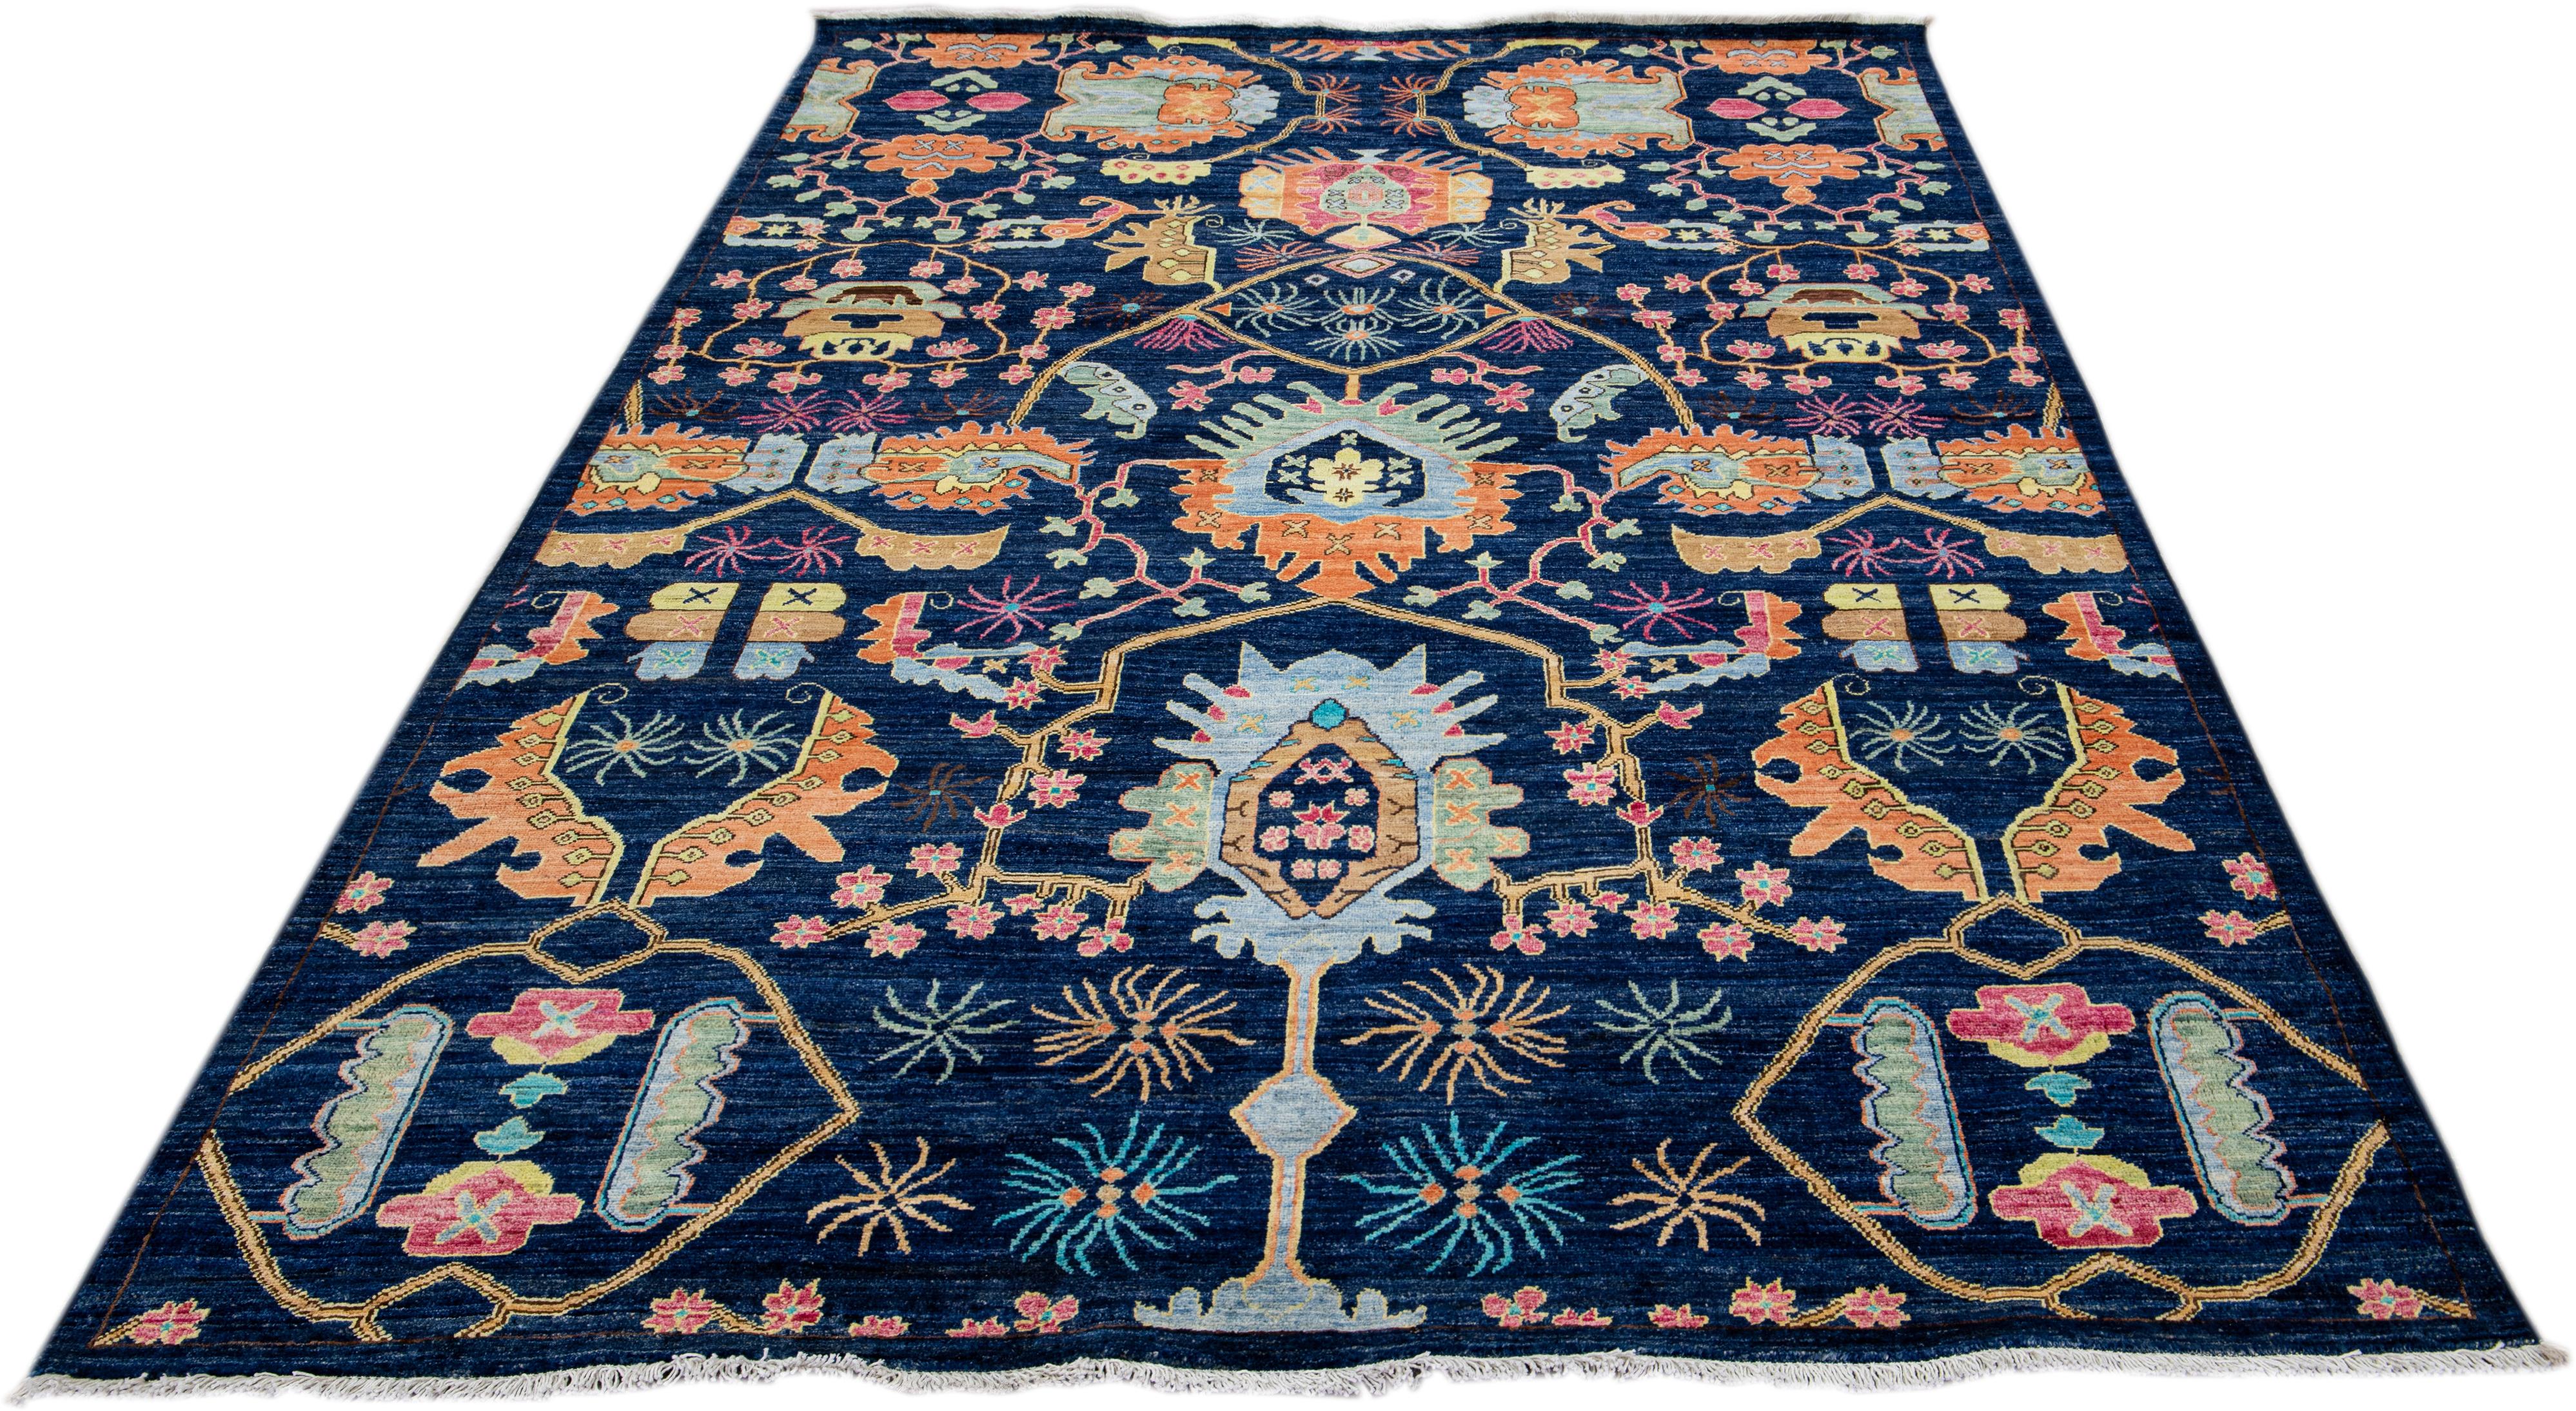 Beautiful modern Bidjar Style hand-knotted wool rug with a navy-blue field. This piece has multicolor accents that feature a gorgeous geometric floral pattern design with white fringes.

This rug measures: 6'3